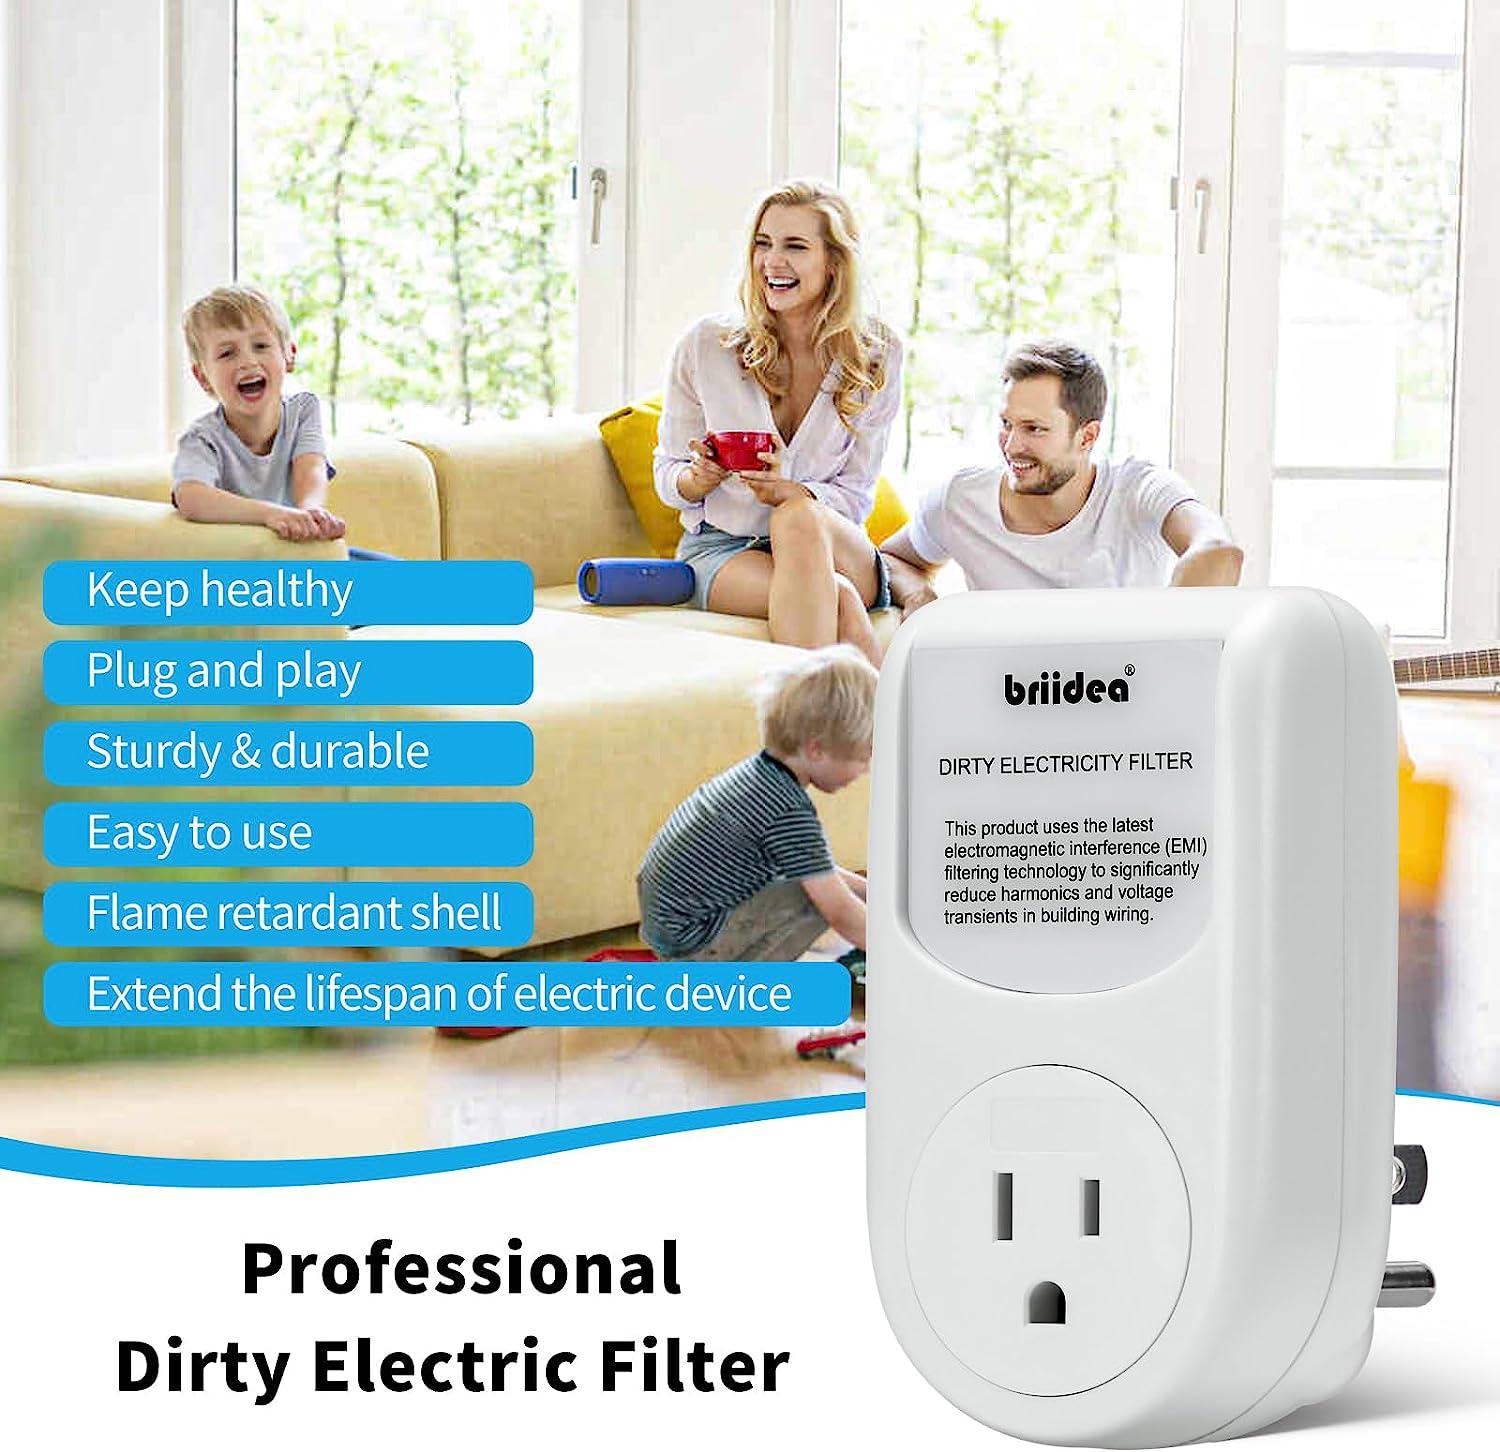 Briidea Dirty Electricity Filters Reduce High-Frequency Noise Caused by Electronic Devices, Provides a Stable and Clean Power Supply for You, Extend the Lifespan of Electric Device, White